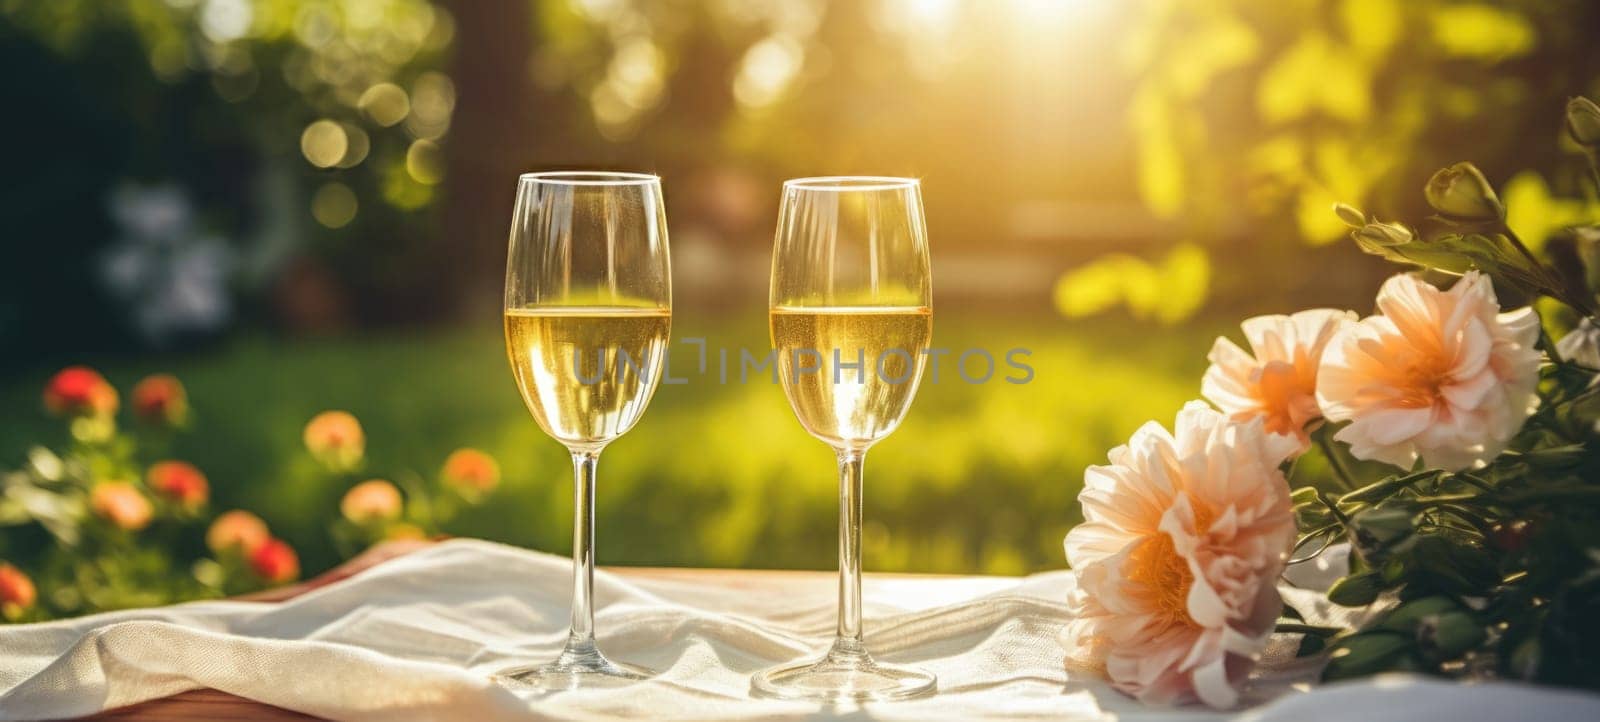 champagne picnic date in the park with flowers, ai